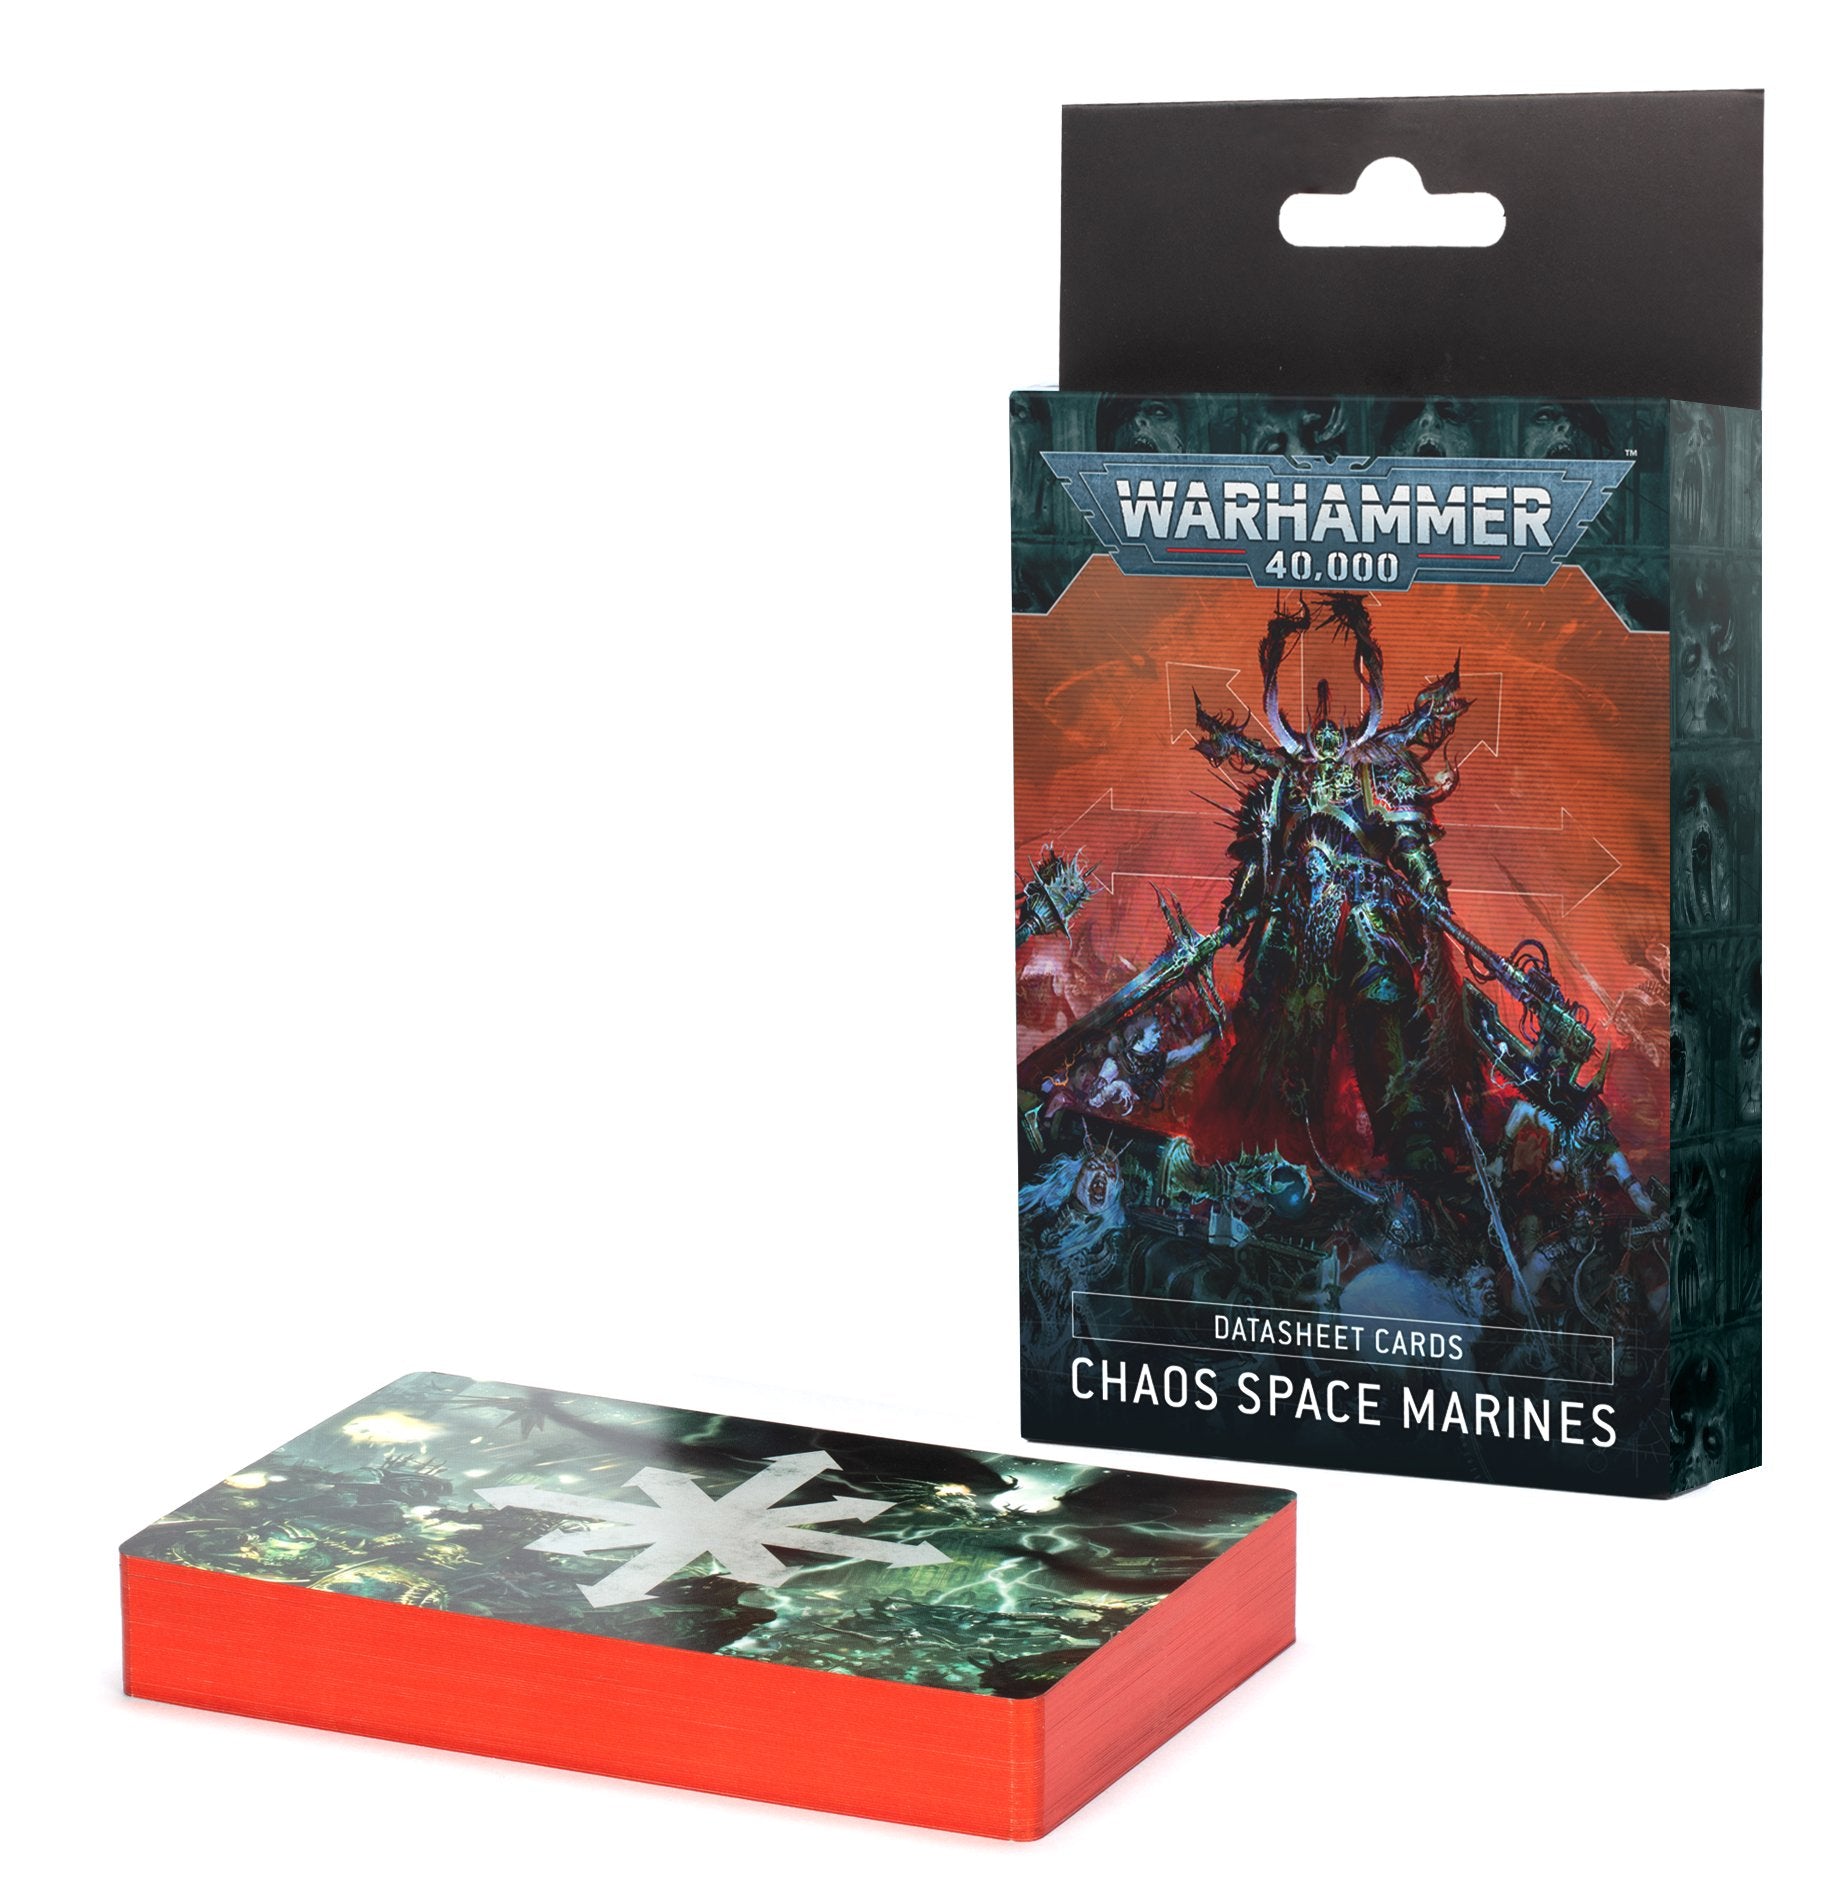 Datasheet Cards: Chaos Space Marines - Release Date 25/5/24